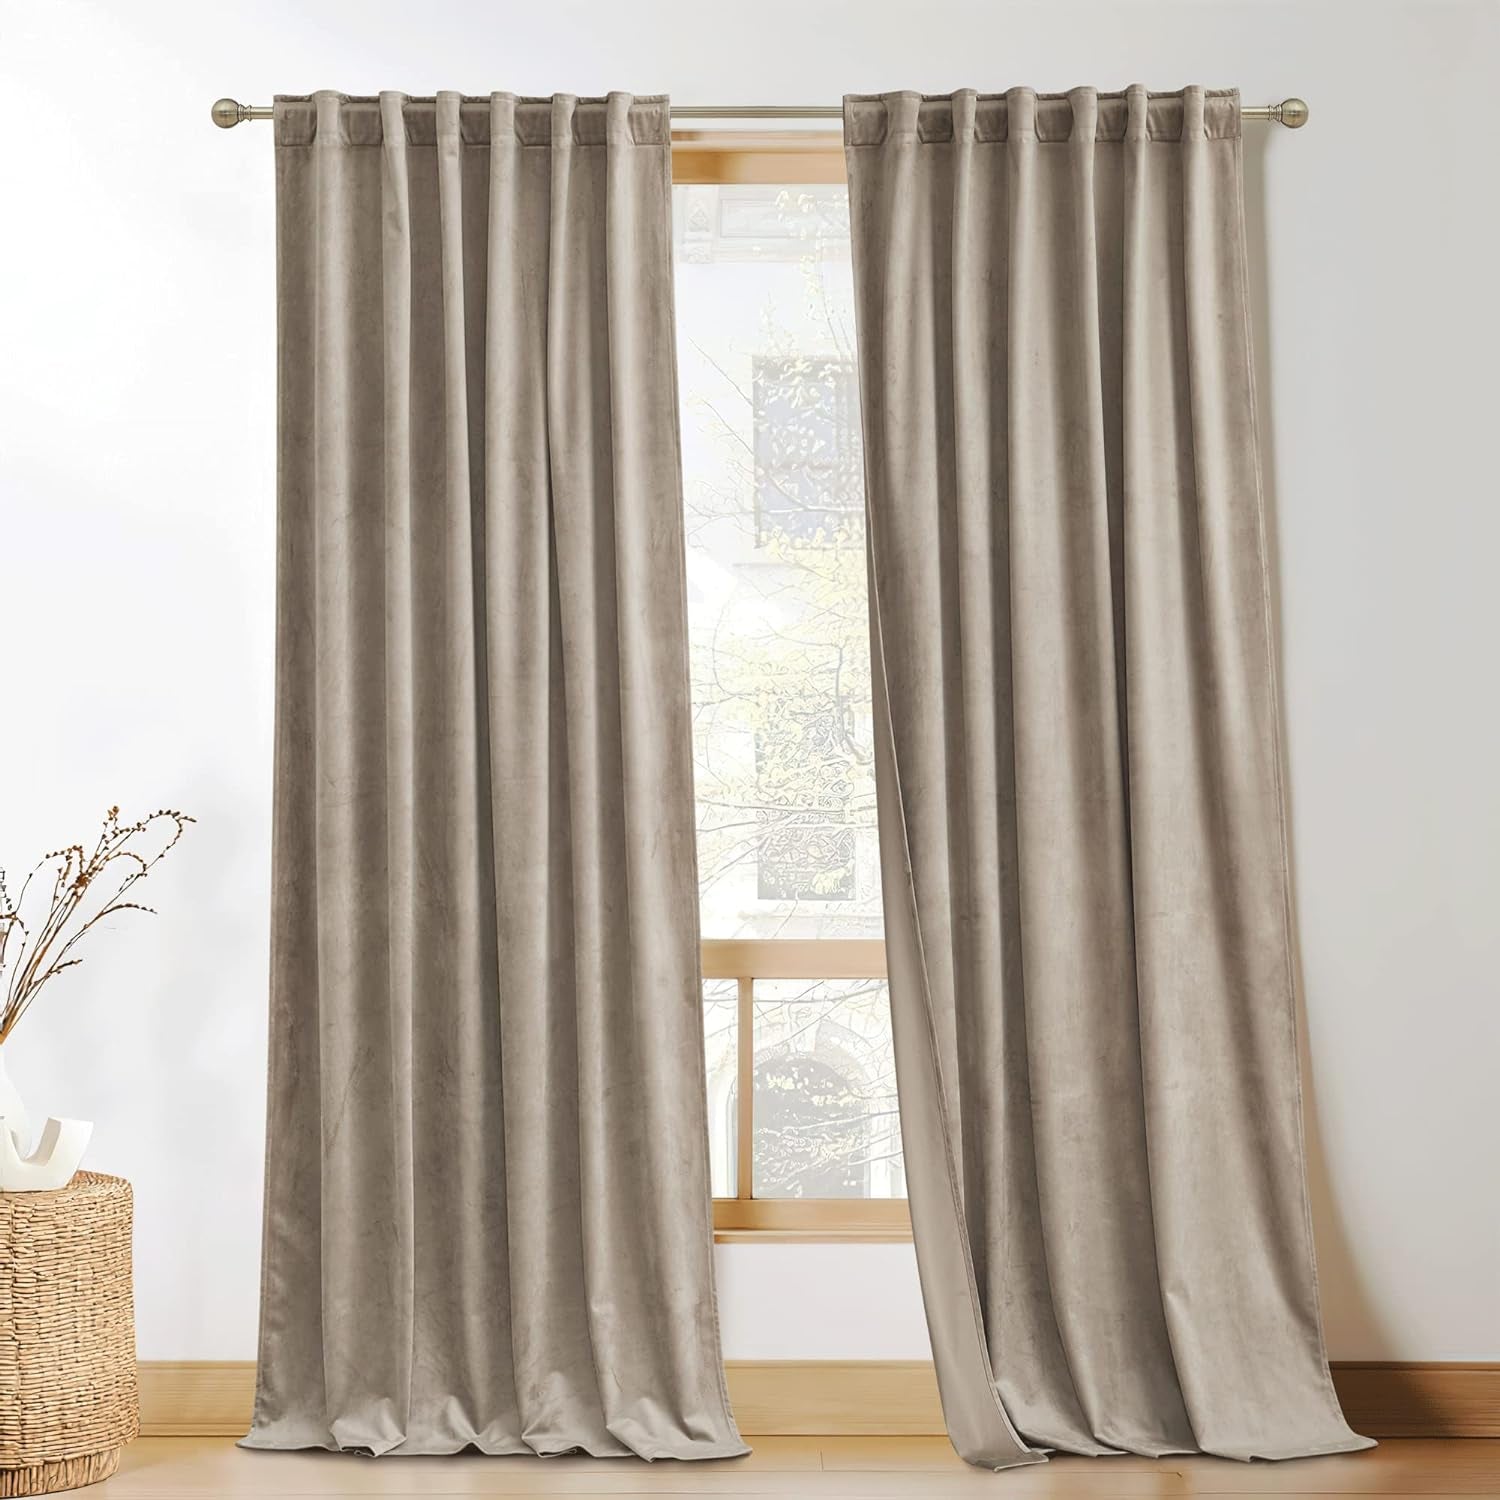 KGORGE Green Velvet Curtains 84 Inches Super Soft Room Darkening Thermal Insulating Window Curtains & Drapes for Bedroom Living Room Backdrop Holiday Christmas Decor, Hunter Green, W 52 X L 84, 2 Pcs  KGORGE Taupe W 52 X L 96 